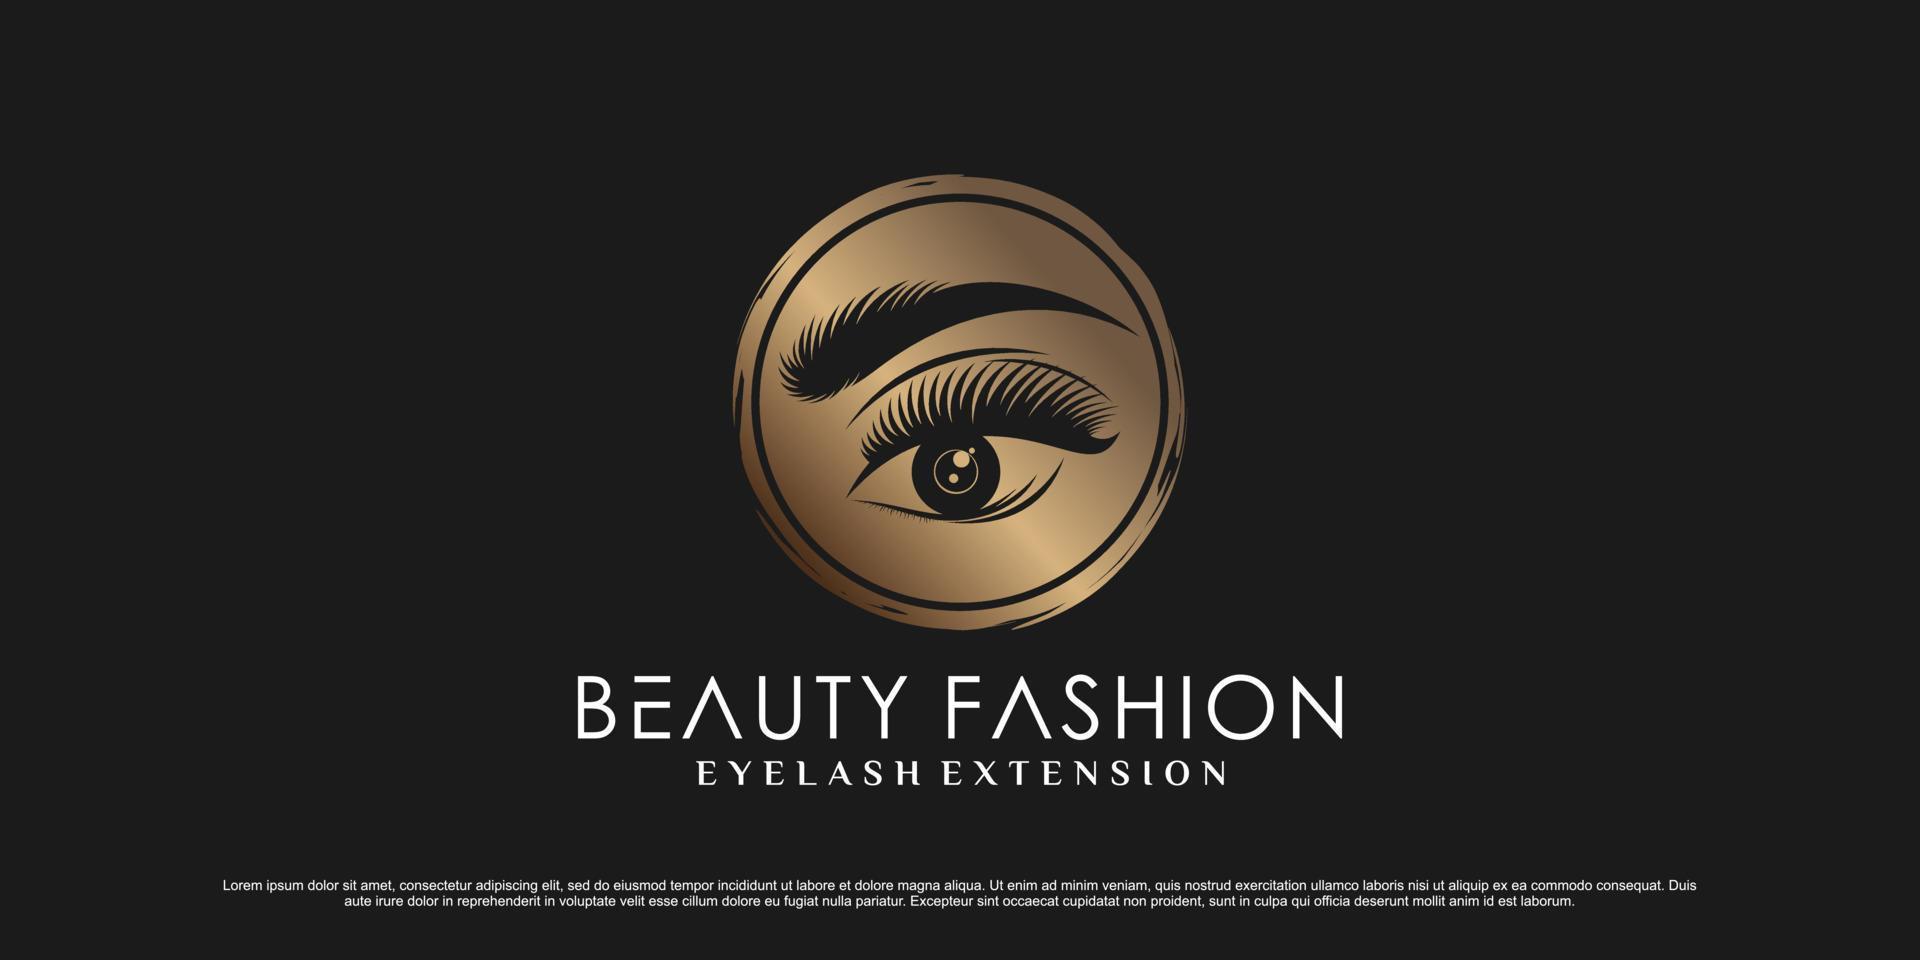 Eyelash extension logo design for beauty icon with negative space circle concept Premium Vector